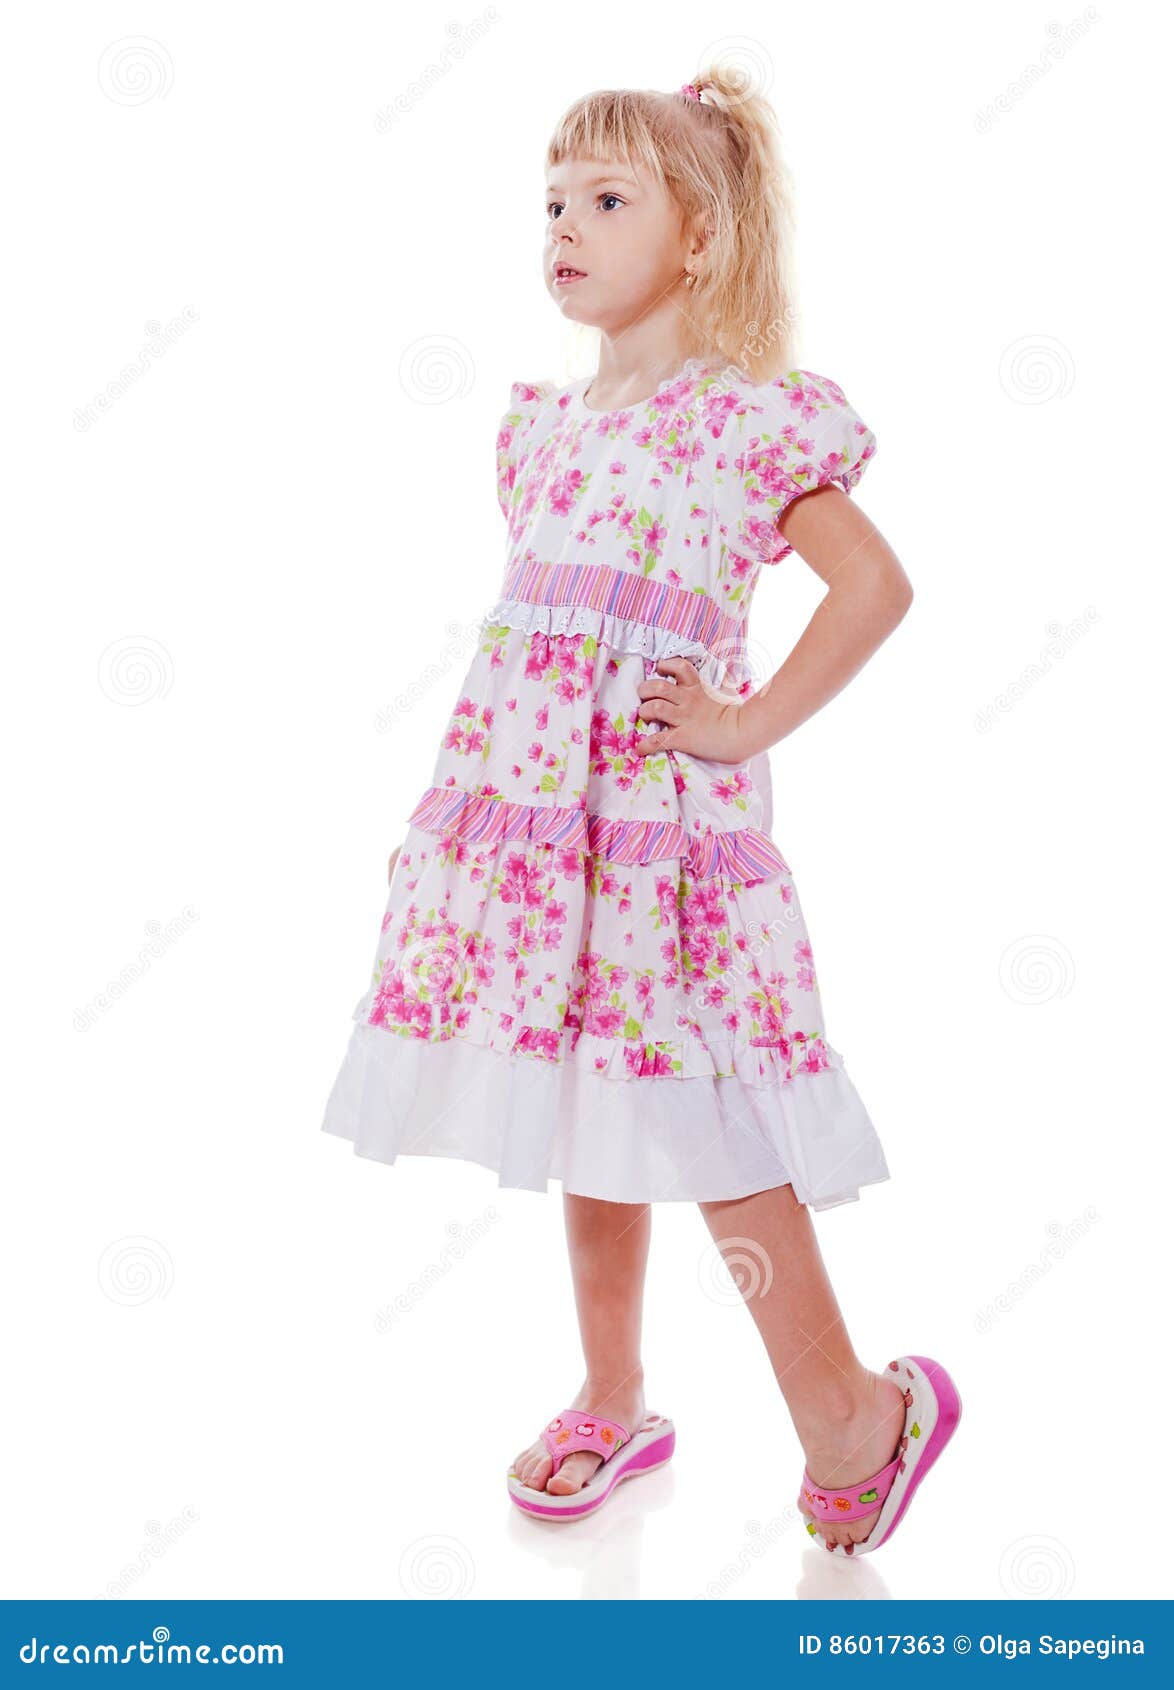 Standing little girl stock image. Image of cheerful, pink - 86017363